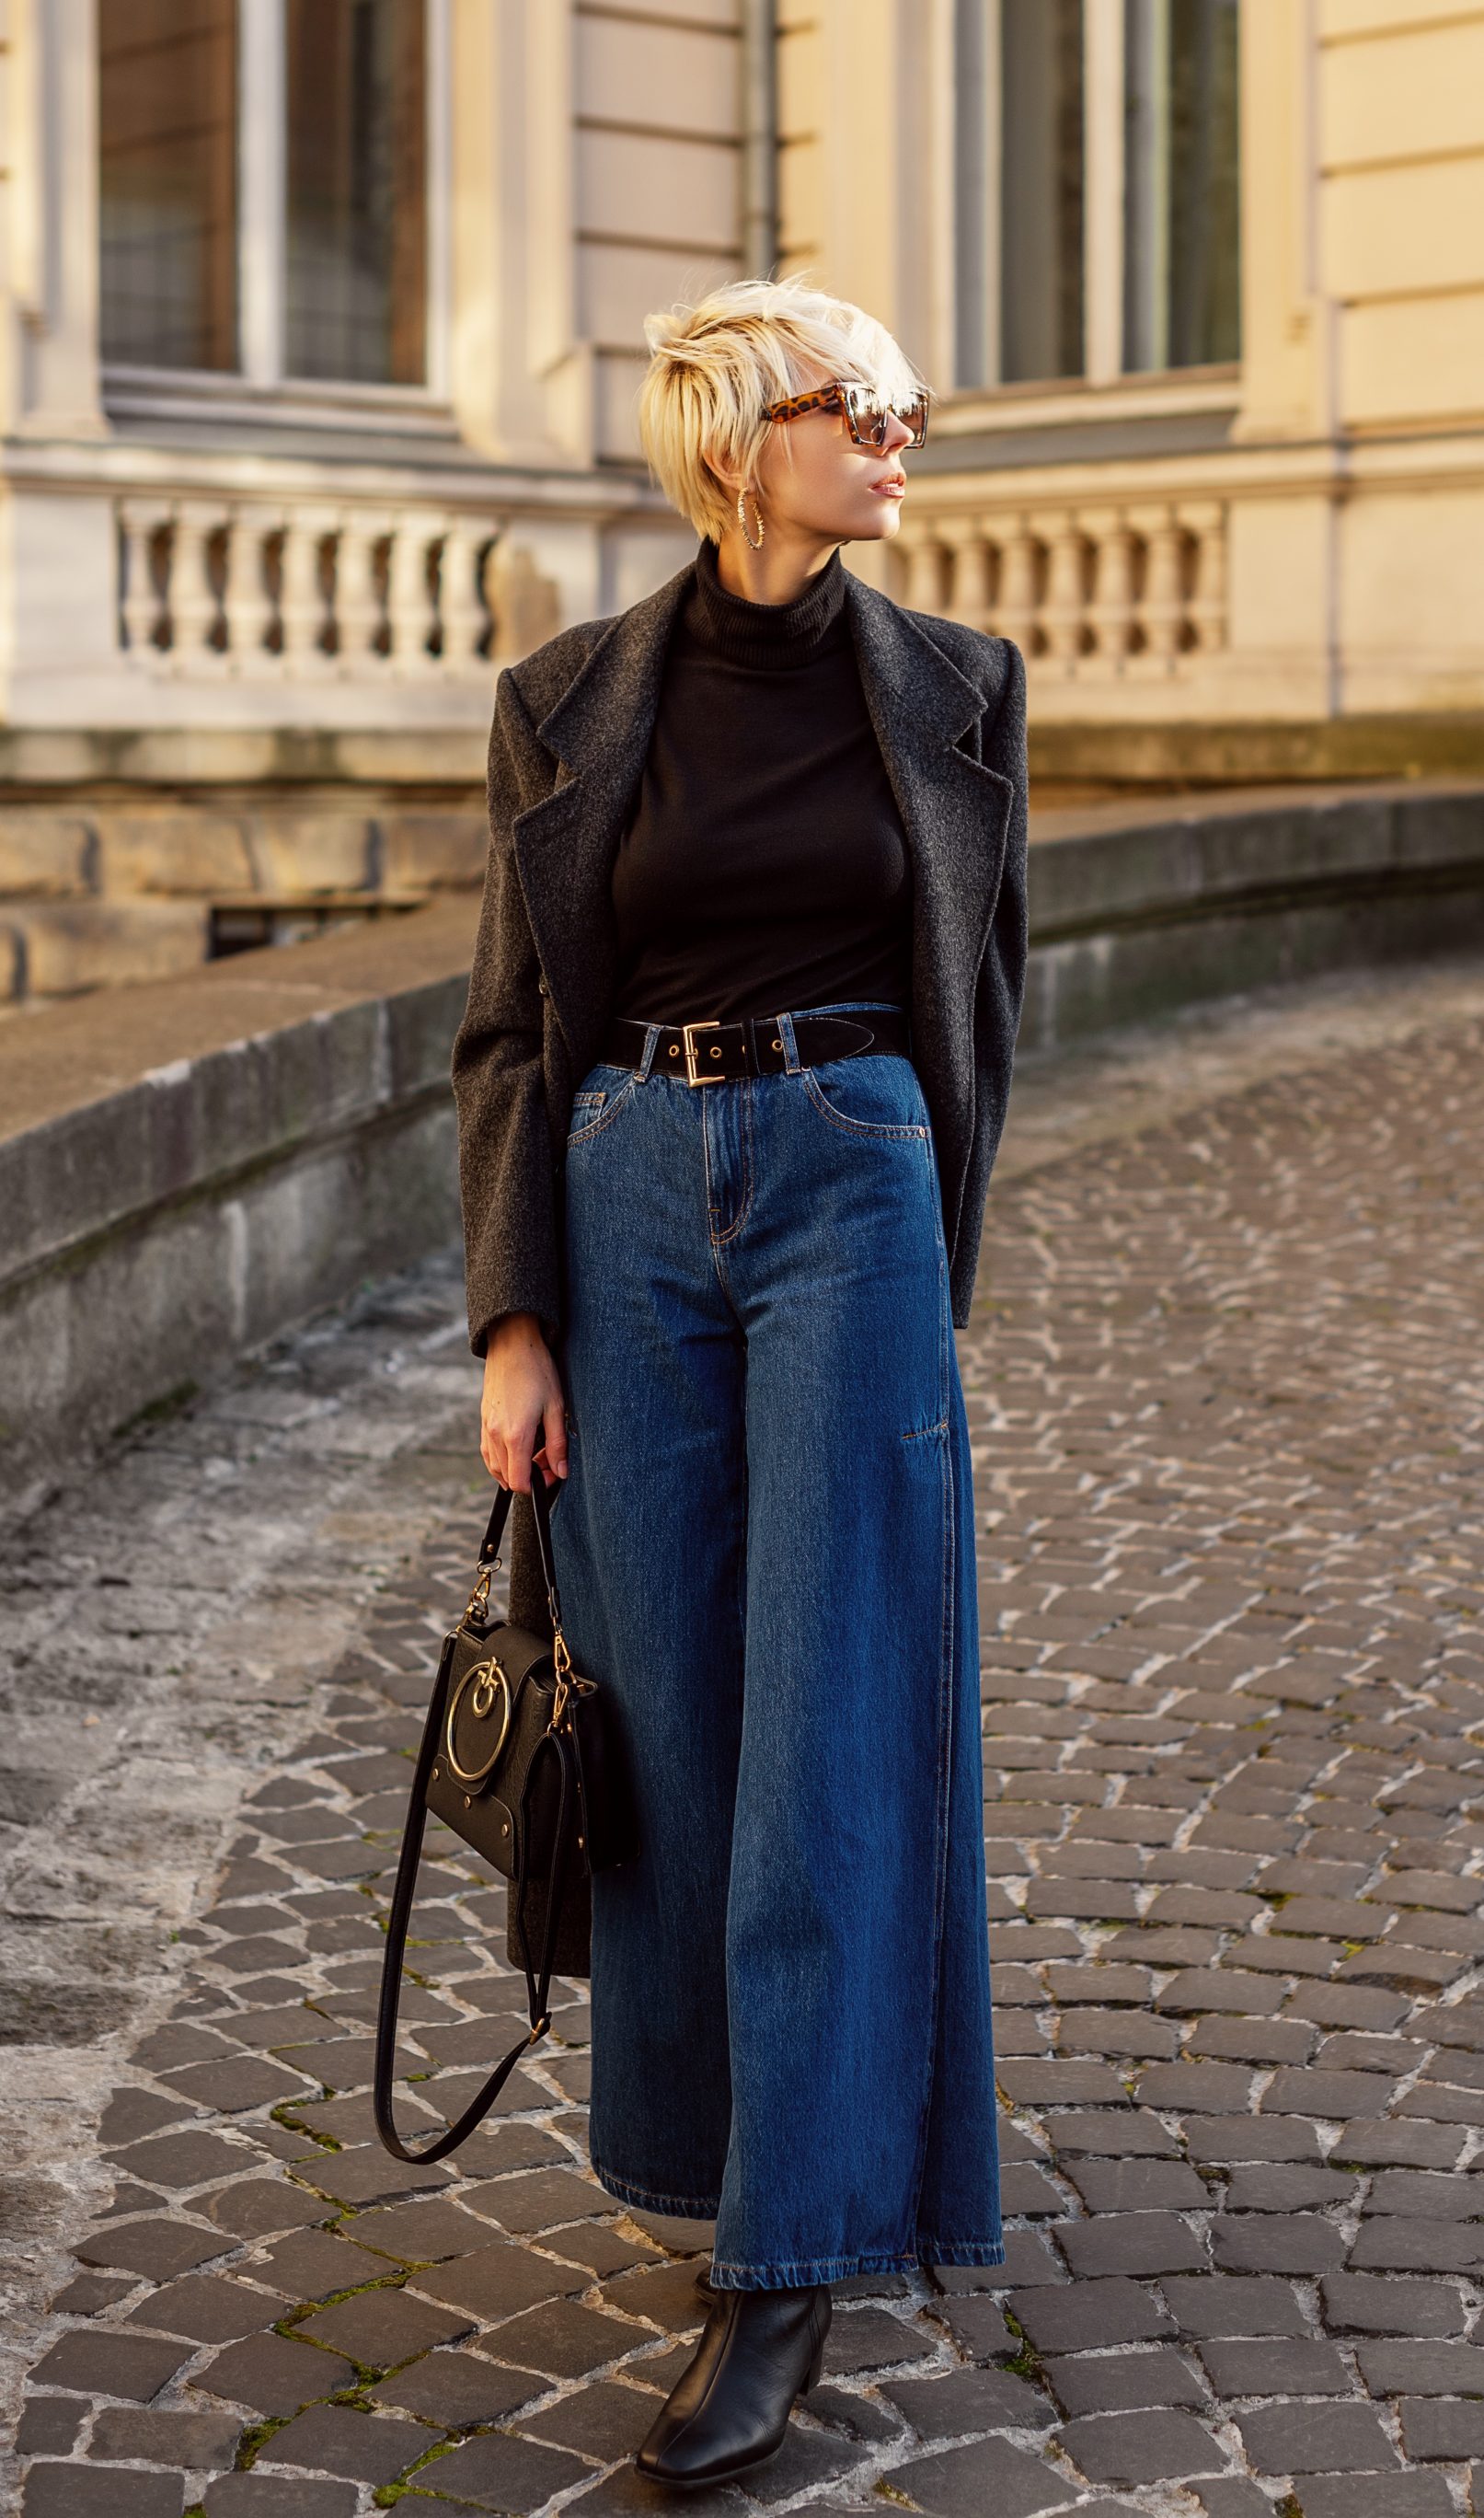 Luxury grey coat, sunglasses, wide leg blue jeans, ankle boots styled with a leather bag